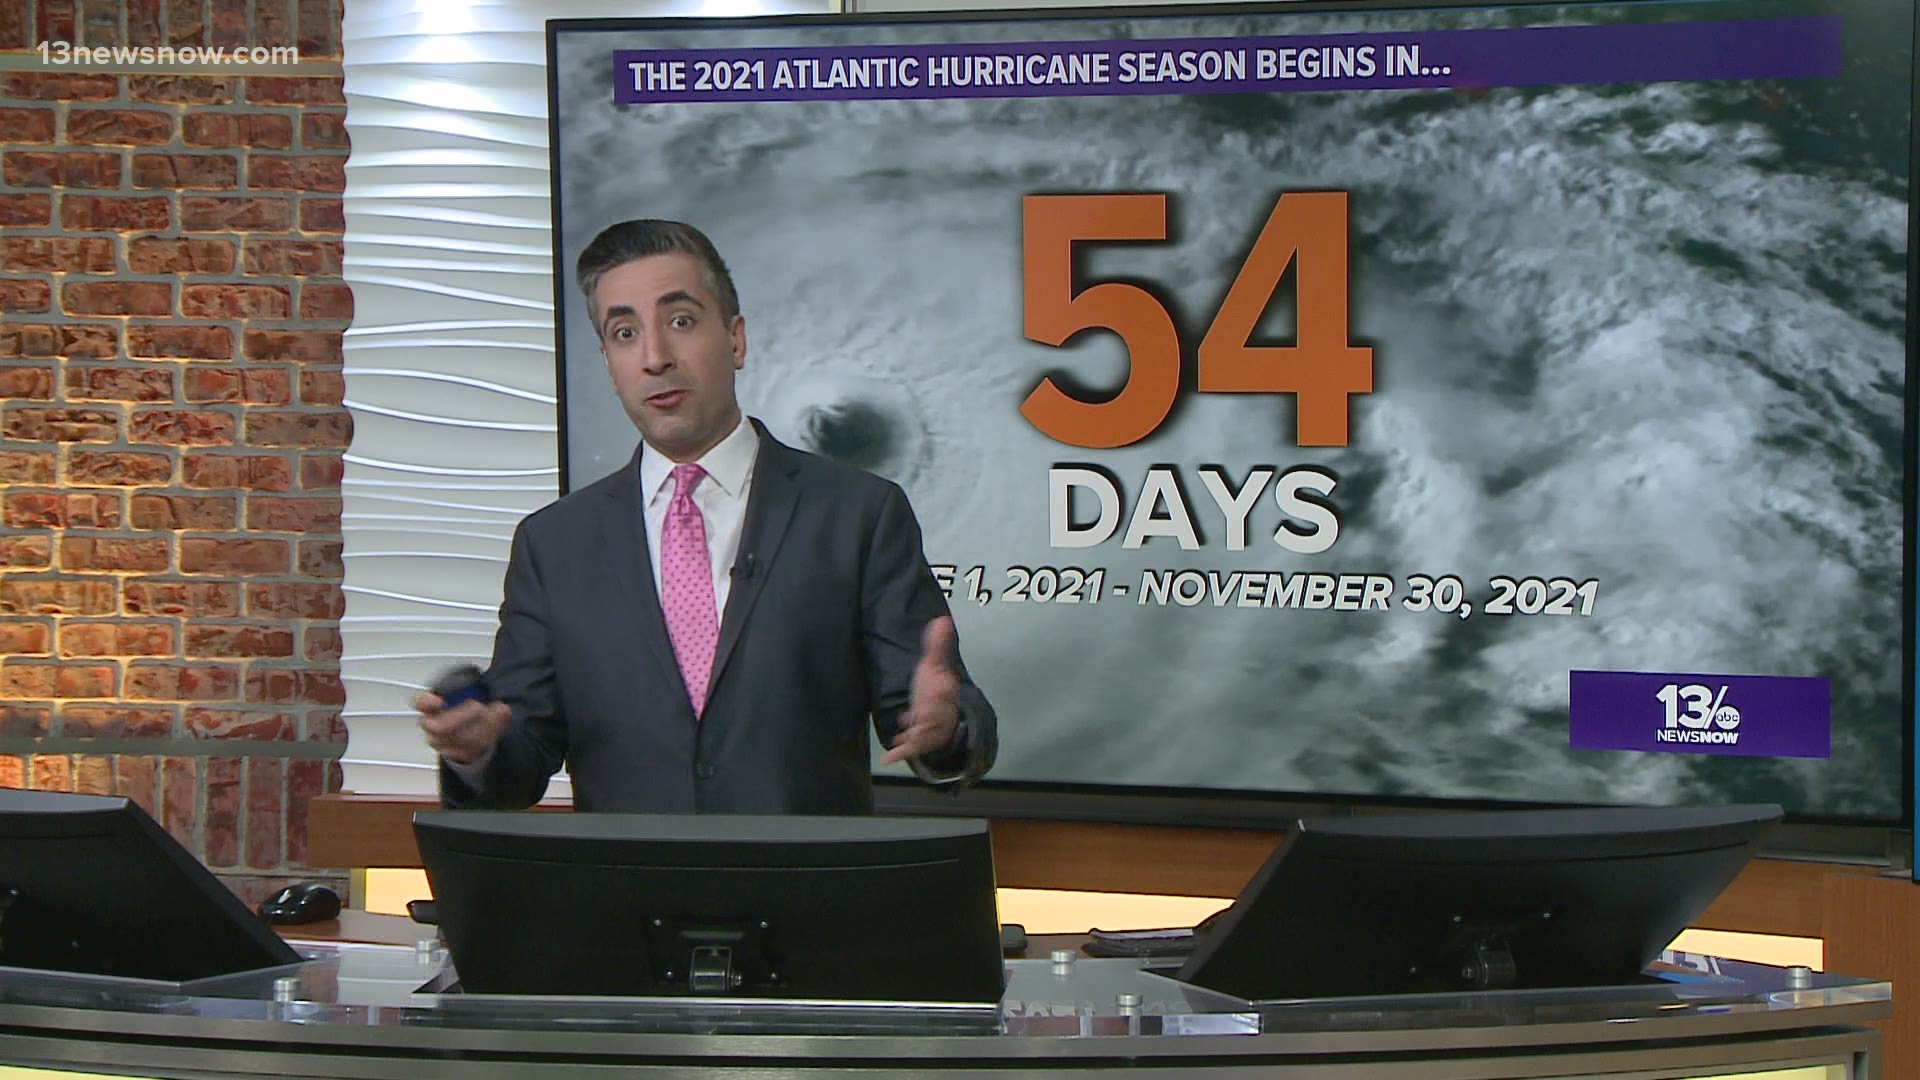 The NOAA predictions haven't been released yet, but Colorado State's prediction has 2021 as another unusually active hurricane season.